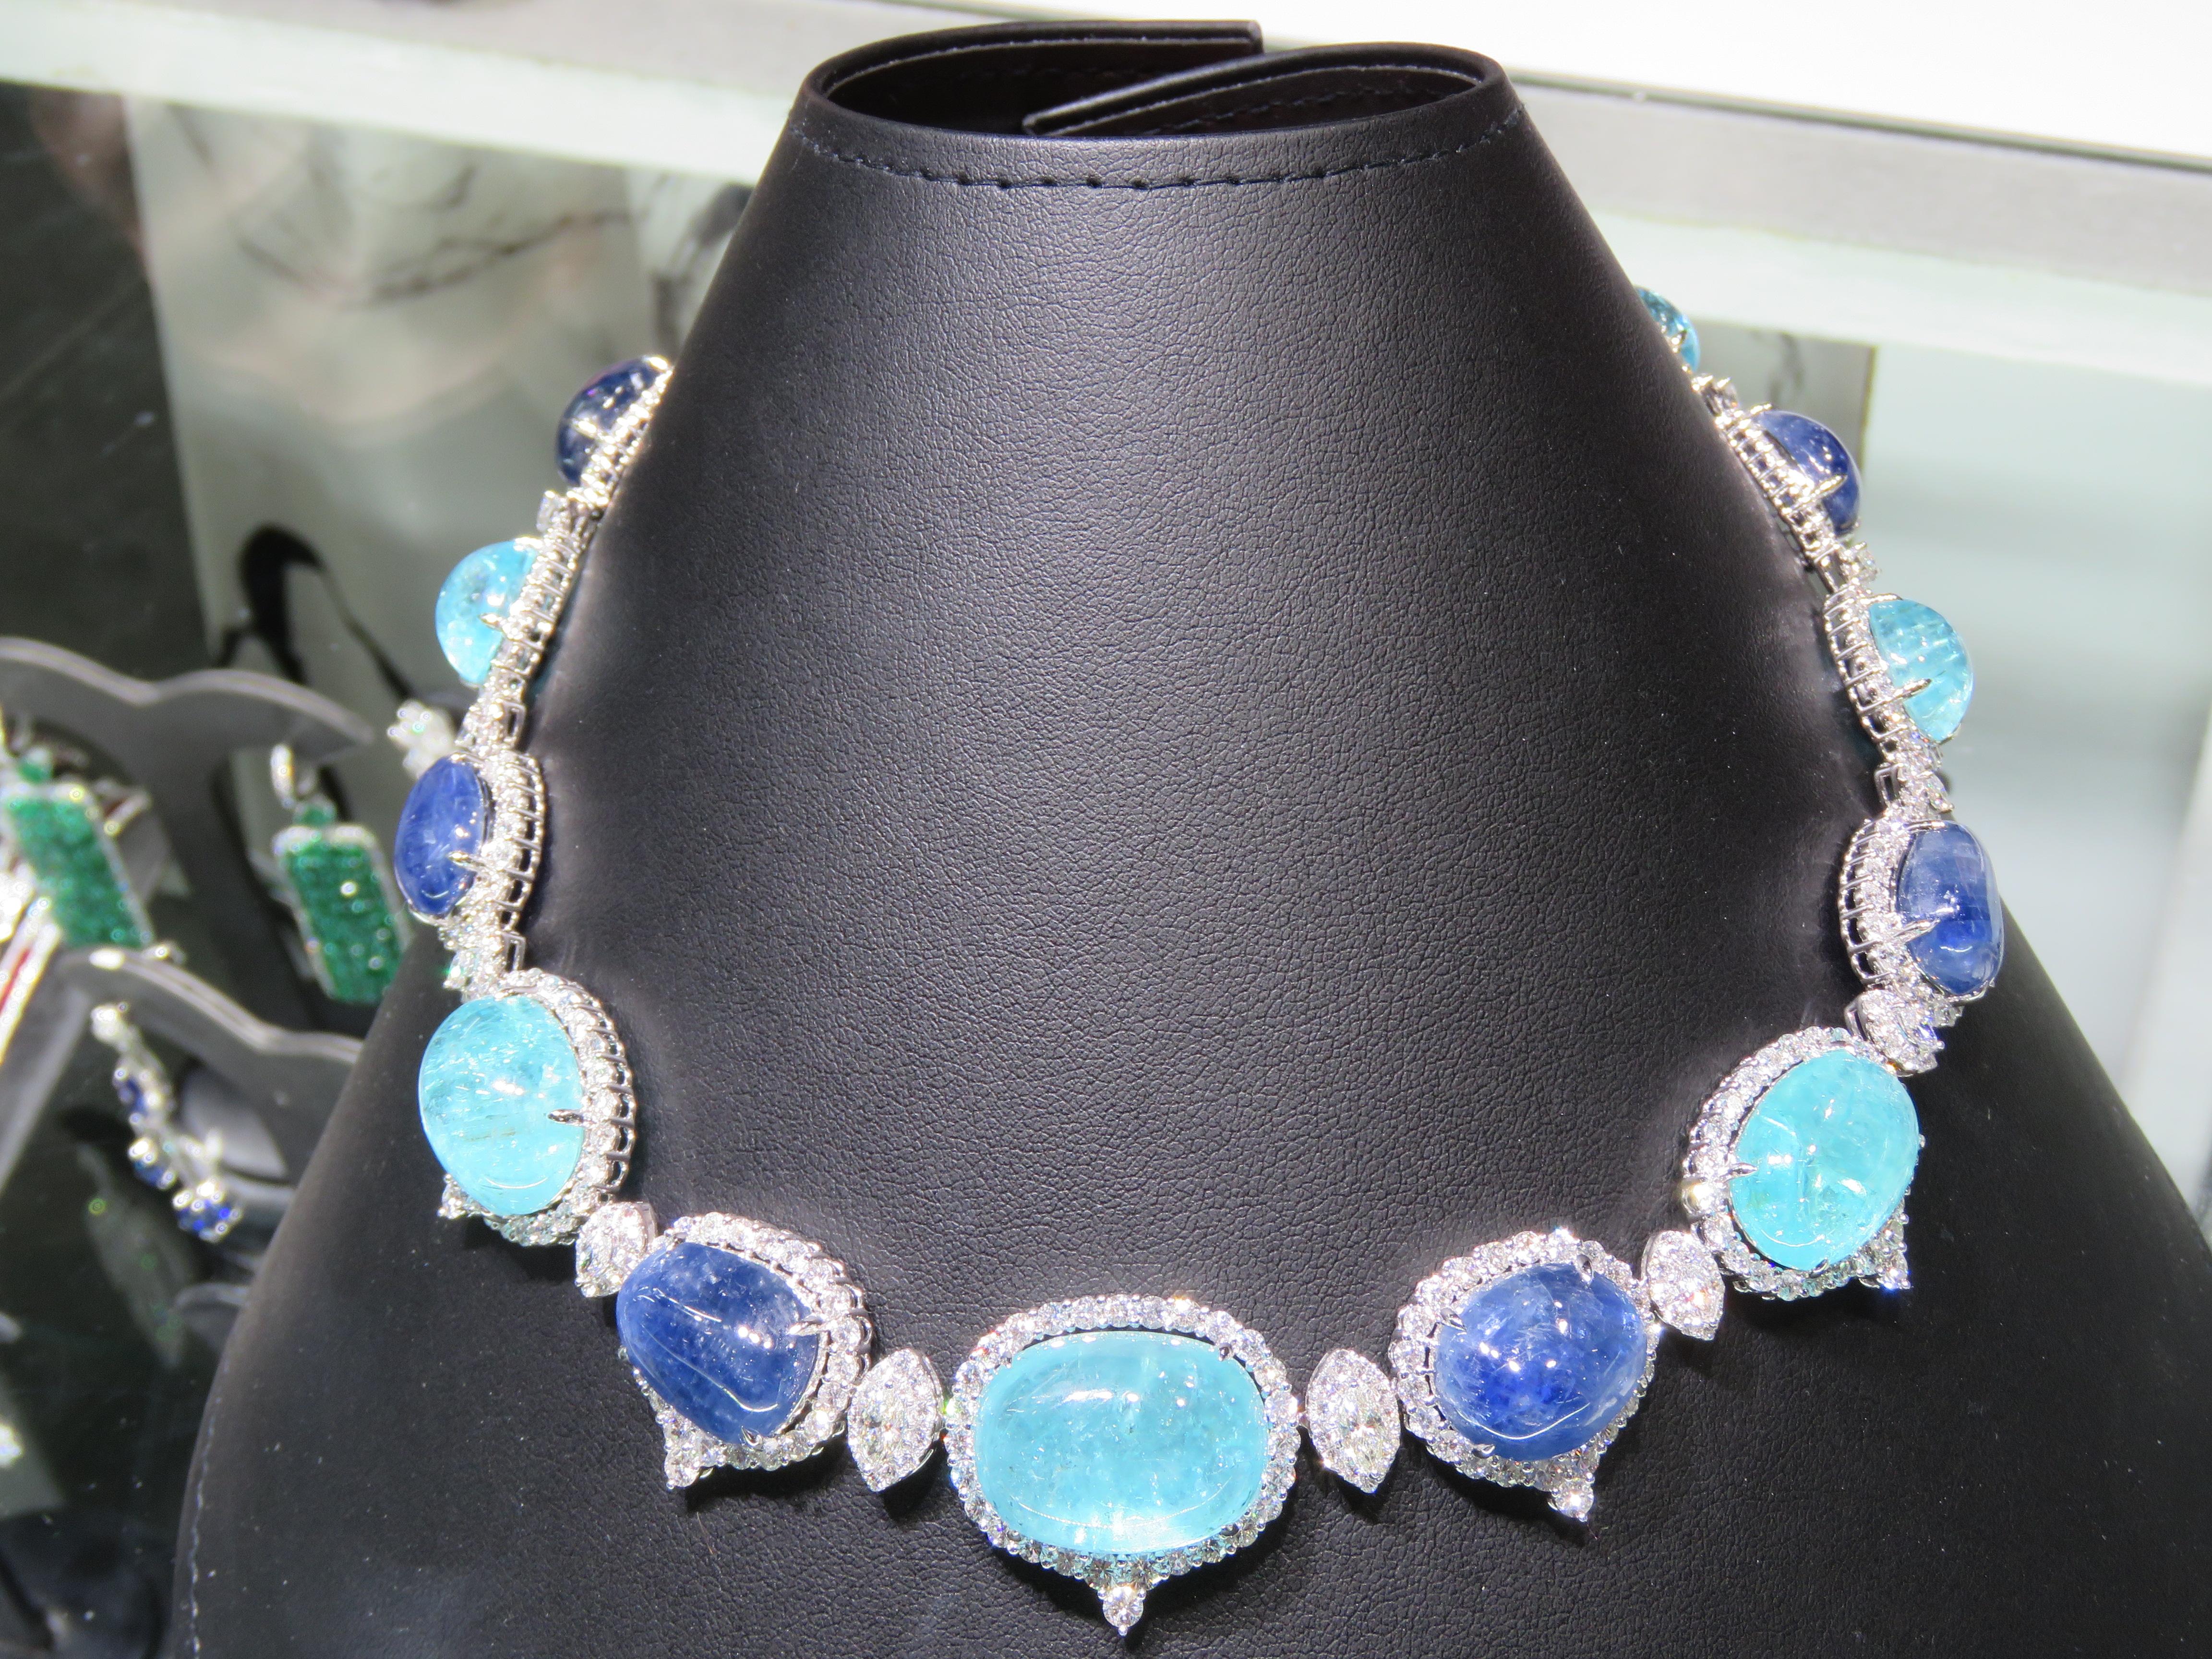 A Magnificent Important 18KT White Gold Paraiba Diamond Natural Blue Sapphire Diamond Necklace. Necklace is comprised of Finely Set Glittering Gorgeous Rare Important Paraiba adorned with Sparkling Rose Cut and Round Diamonds and Round Emeralds!!